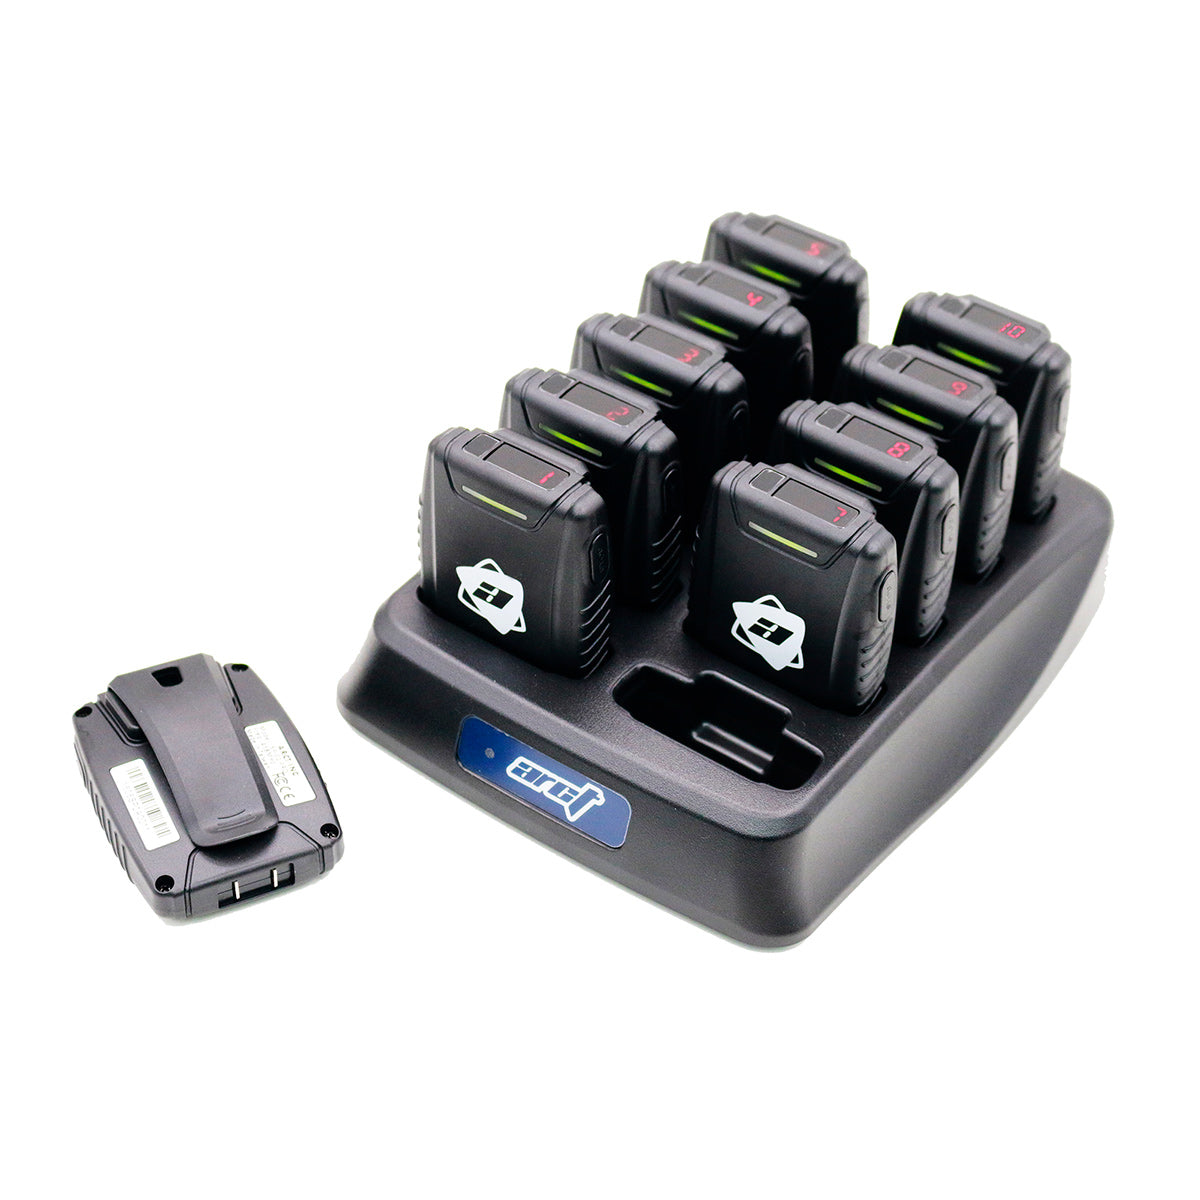 Charger and Transmitter 10 Pagers Newest by Arct Wireless Paging System Kit 